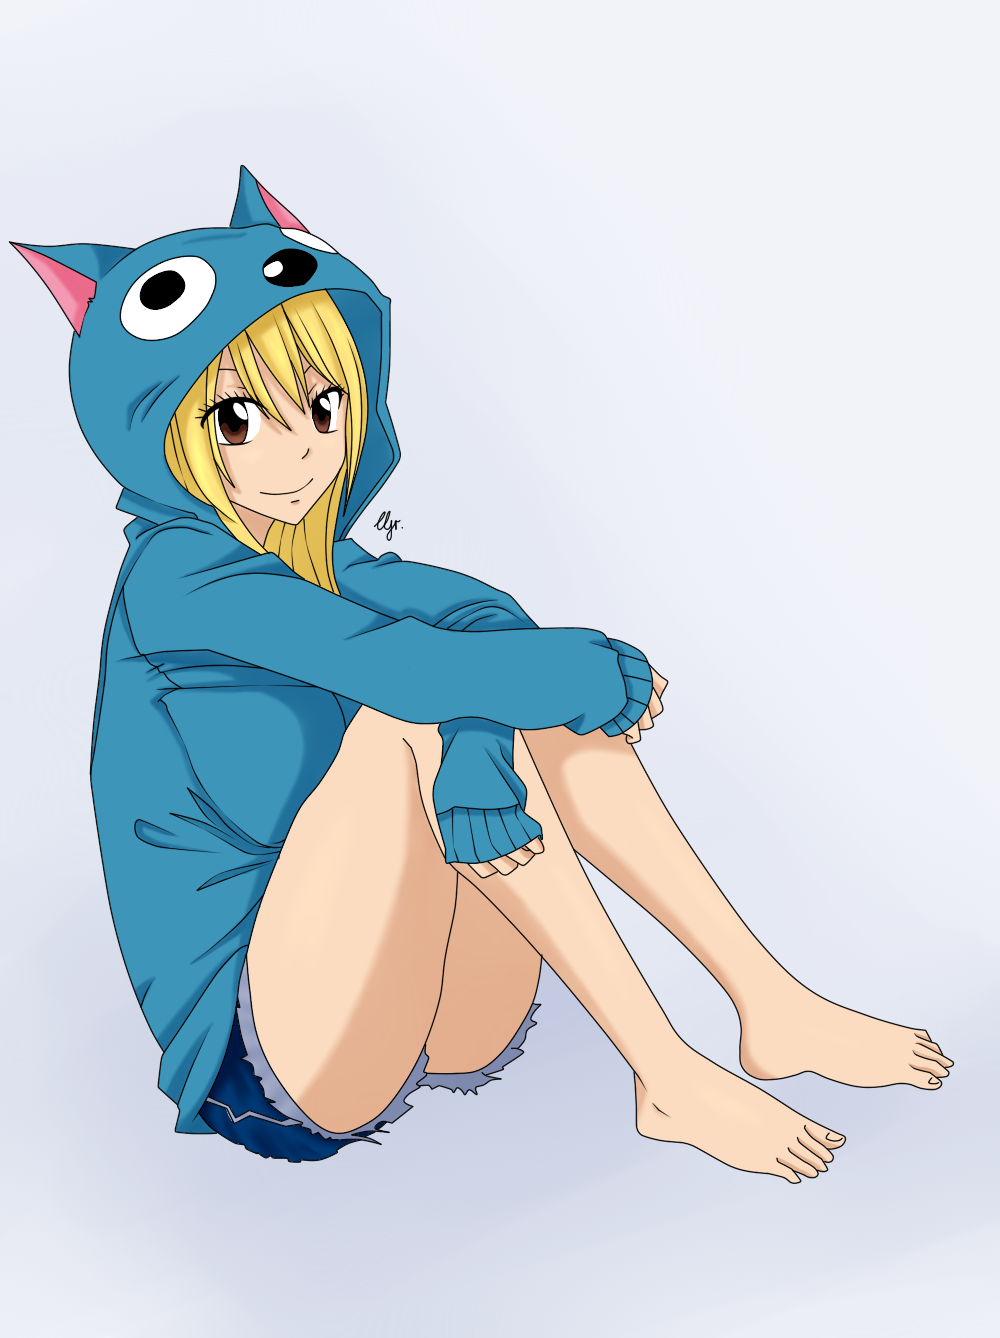 http://fc08.deviantart.net/fs71/f/2013/147/7/b/fairy_tail_lucy_in_happy_outfit_by_roseofcherry-d66sgs4.png